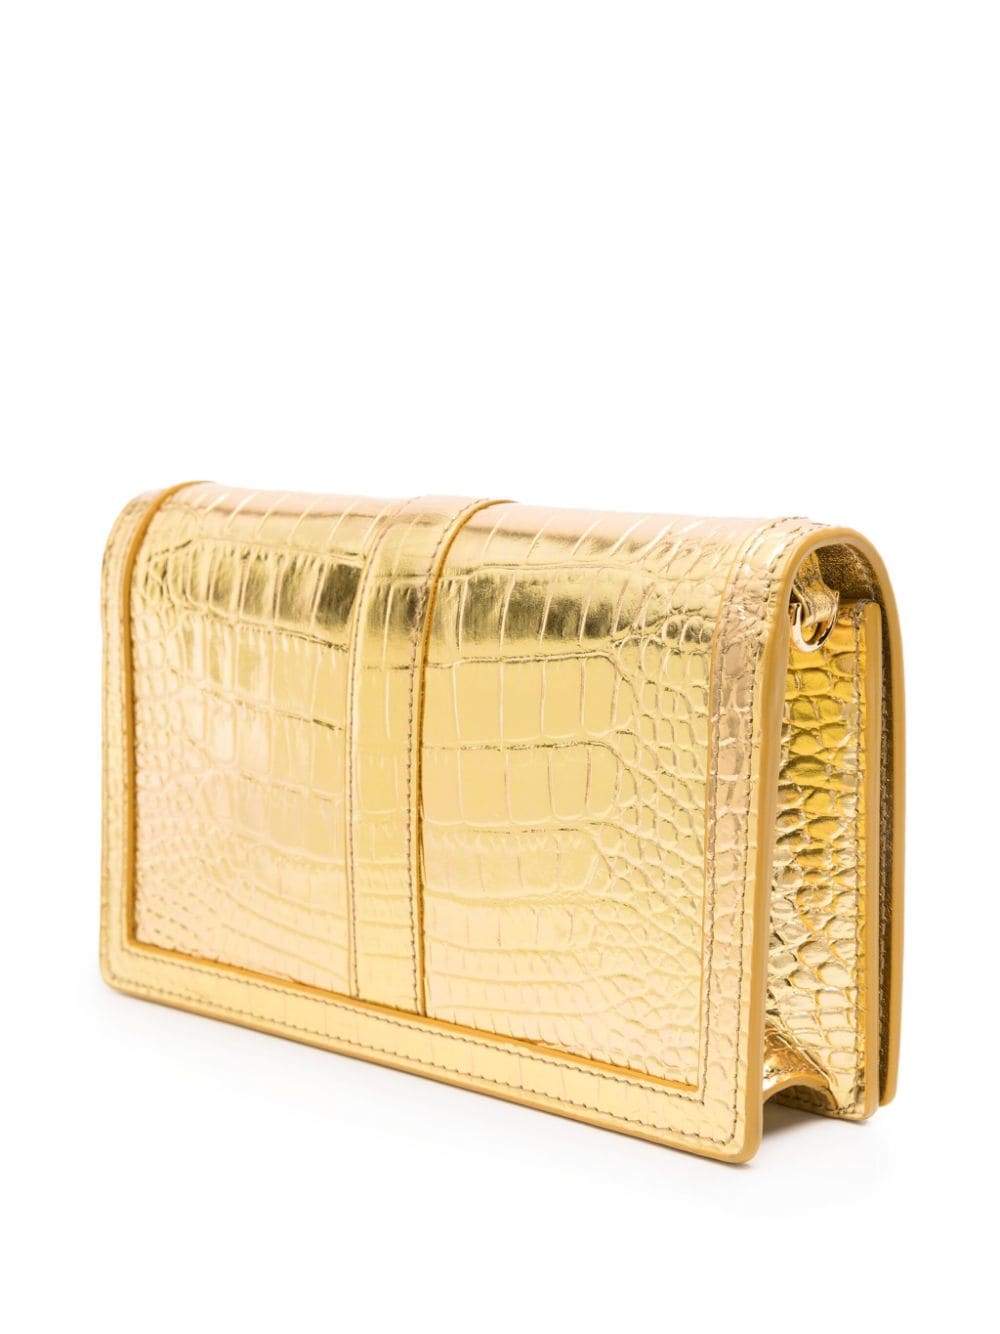 VERSACE Gold Crocodile-Embossed Leather Crossbody Bag with Greek Detailing